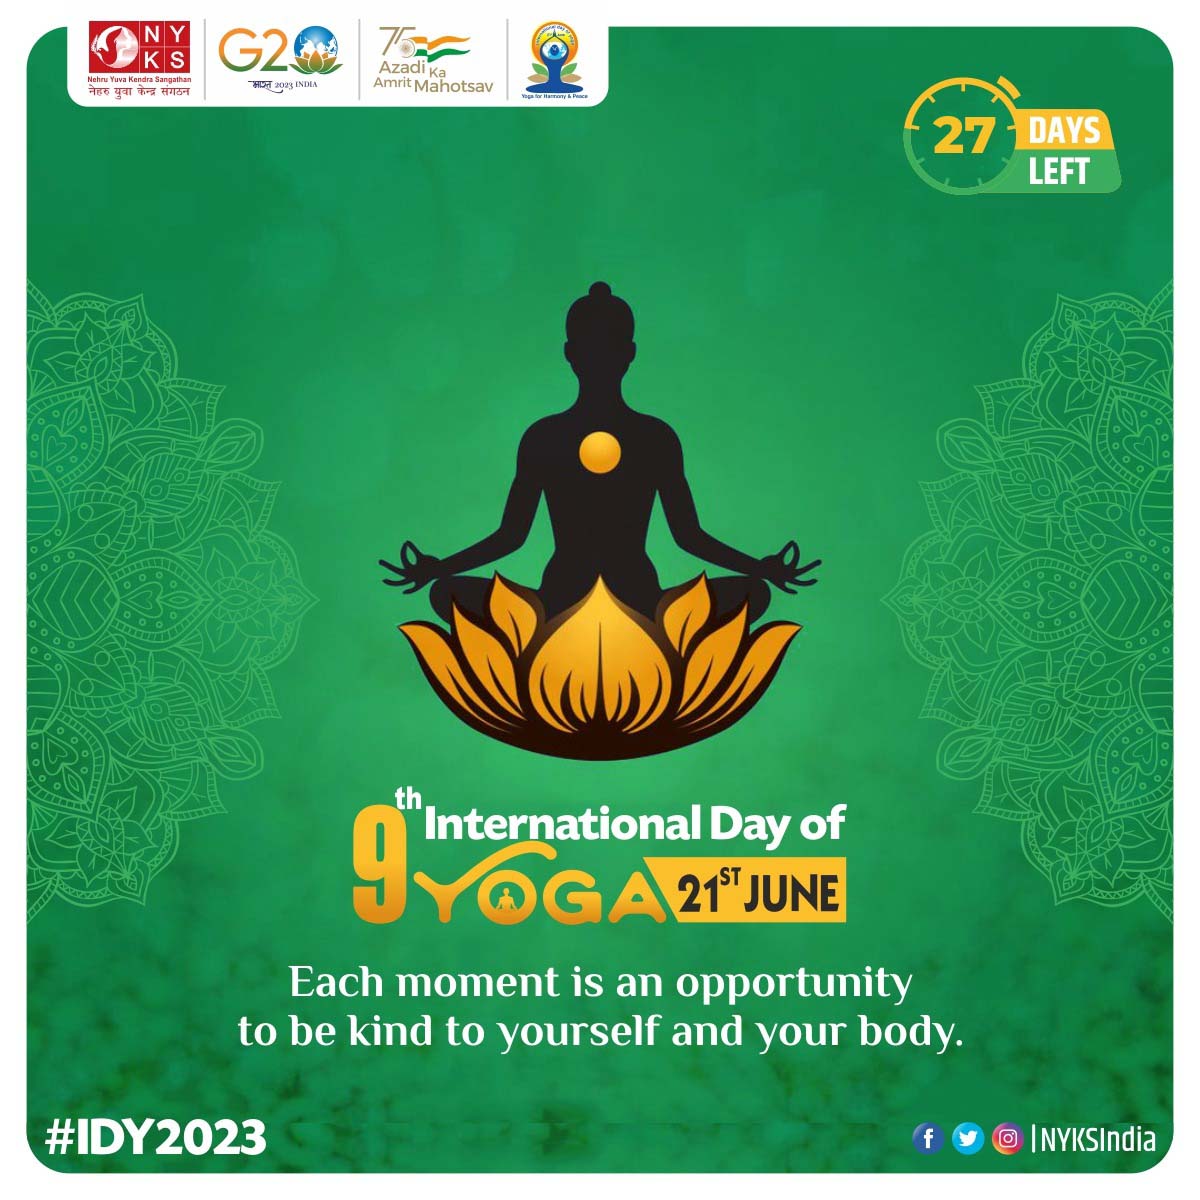 Practice yoga daily and break all the barriers to stress in body and mind. 

#NYKS4Yoga #IDY2023 #Yoga #Meditation